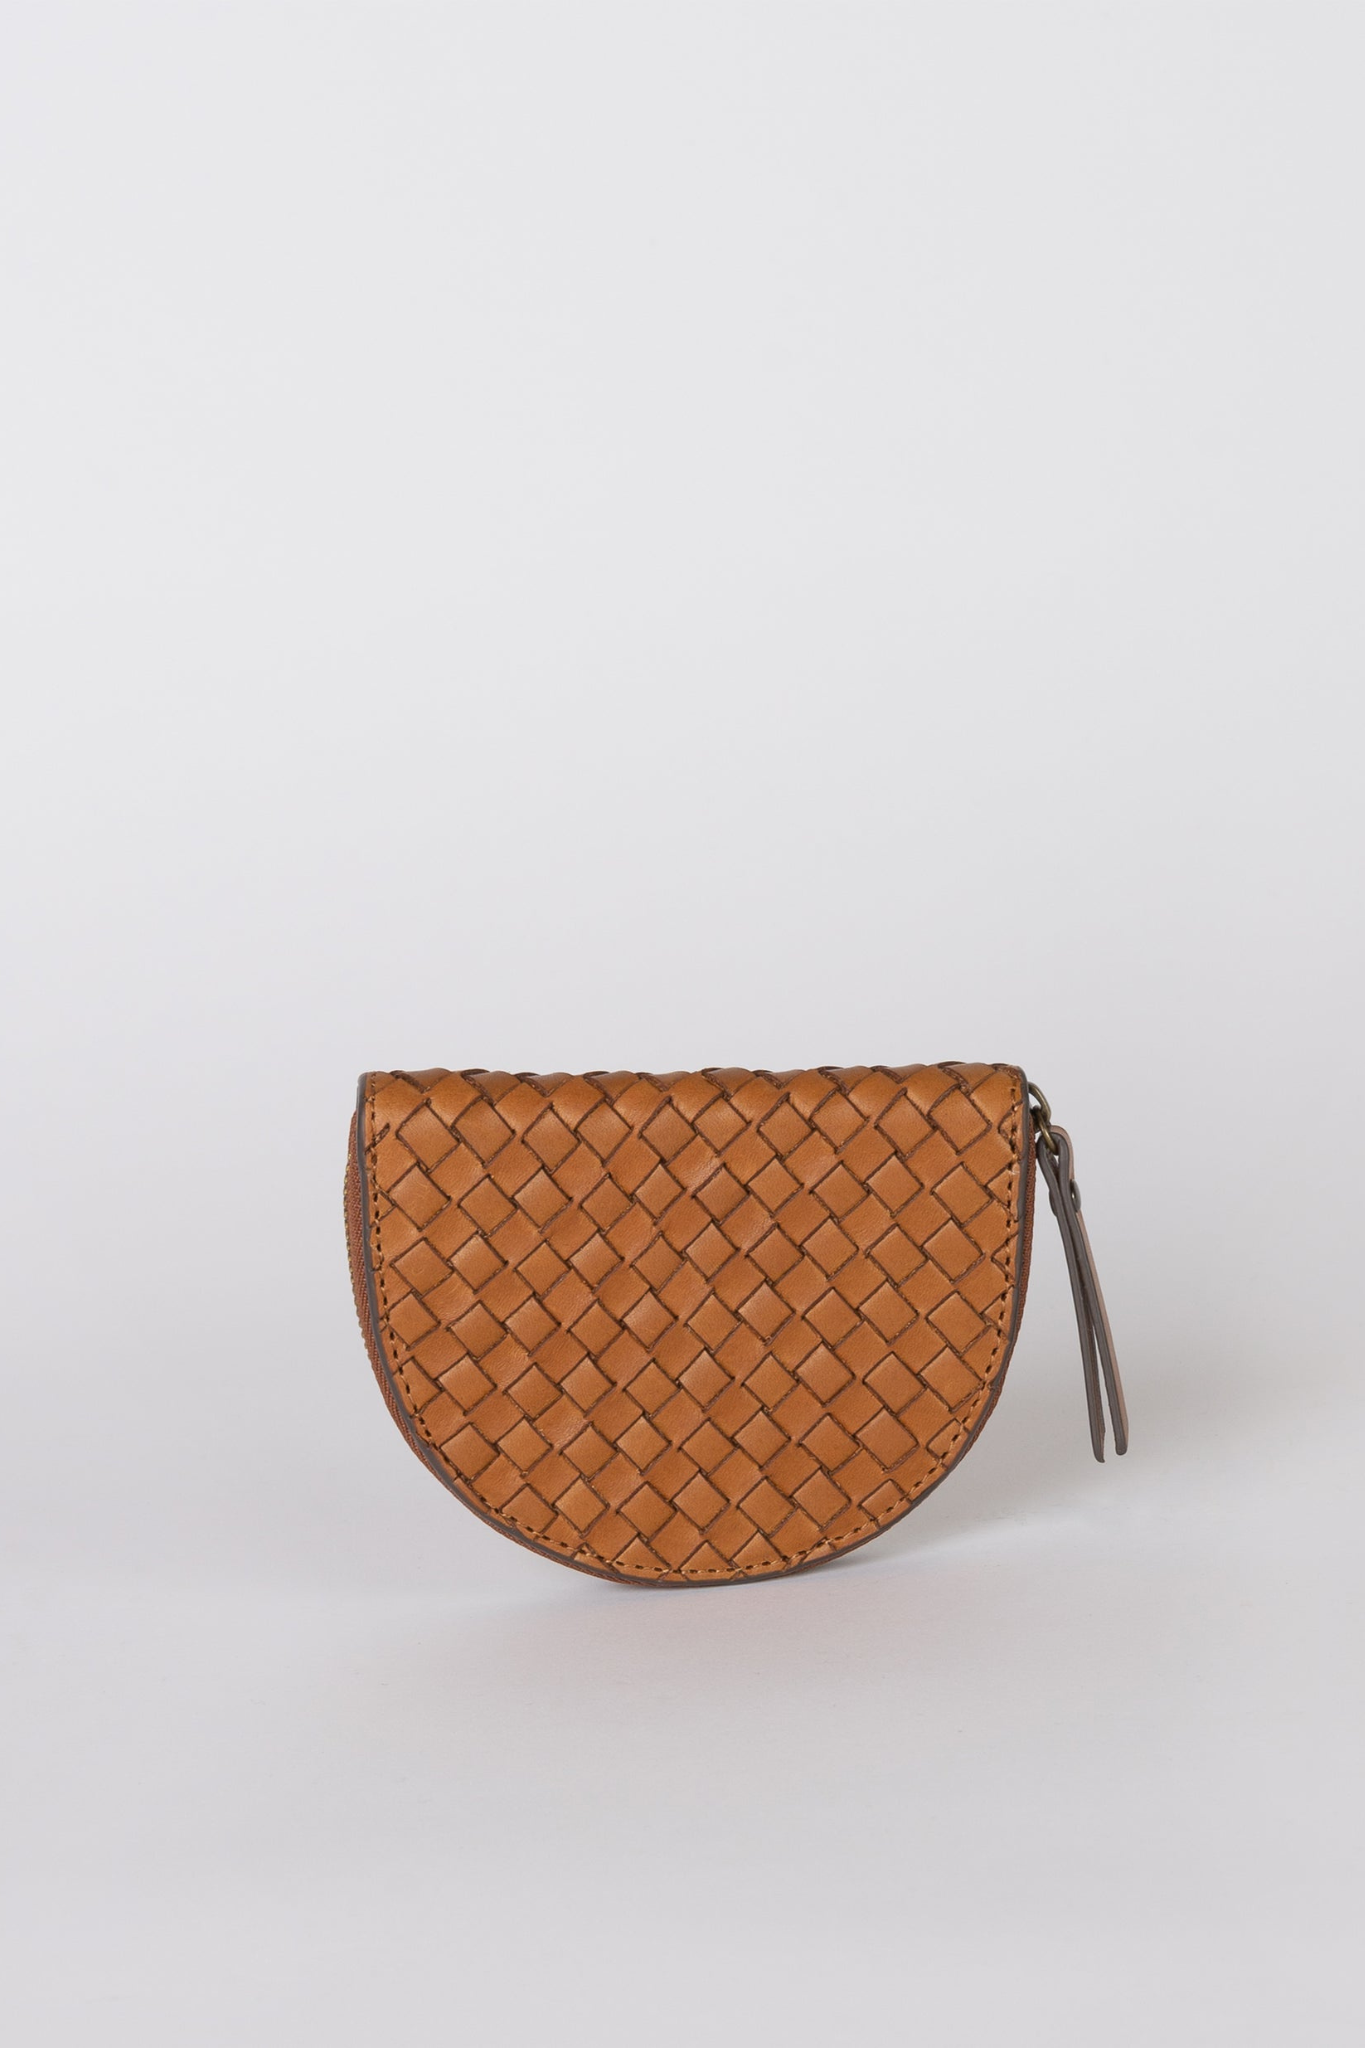 LAURA COIN PURSE - COGNAC WOVEN CLASSIC LEATHER - BROWN